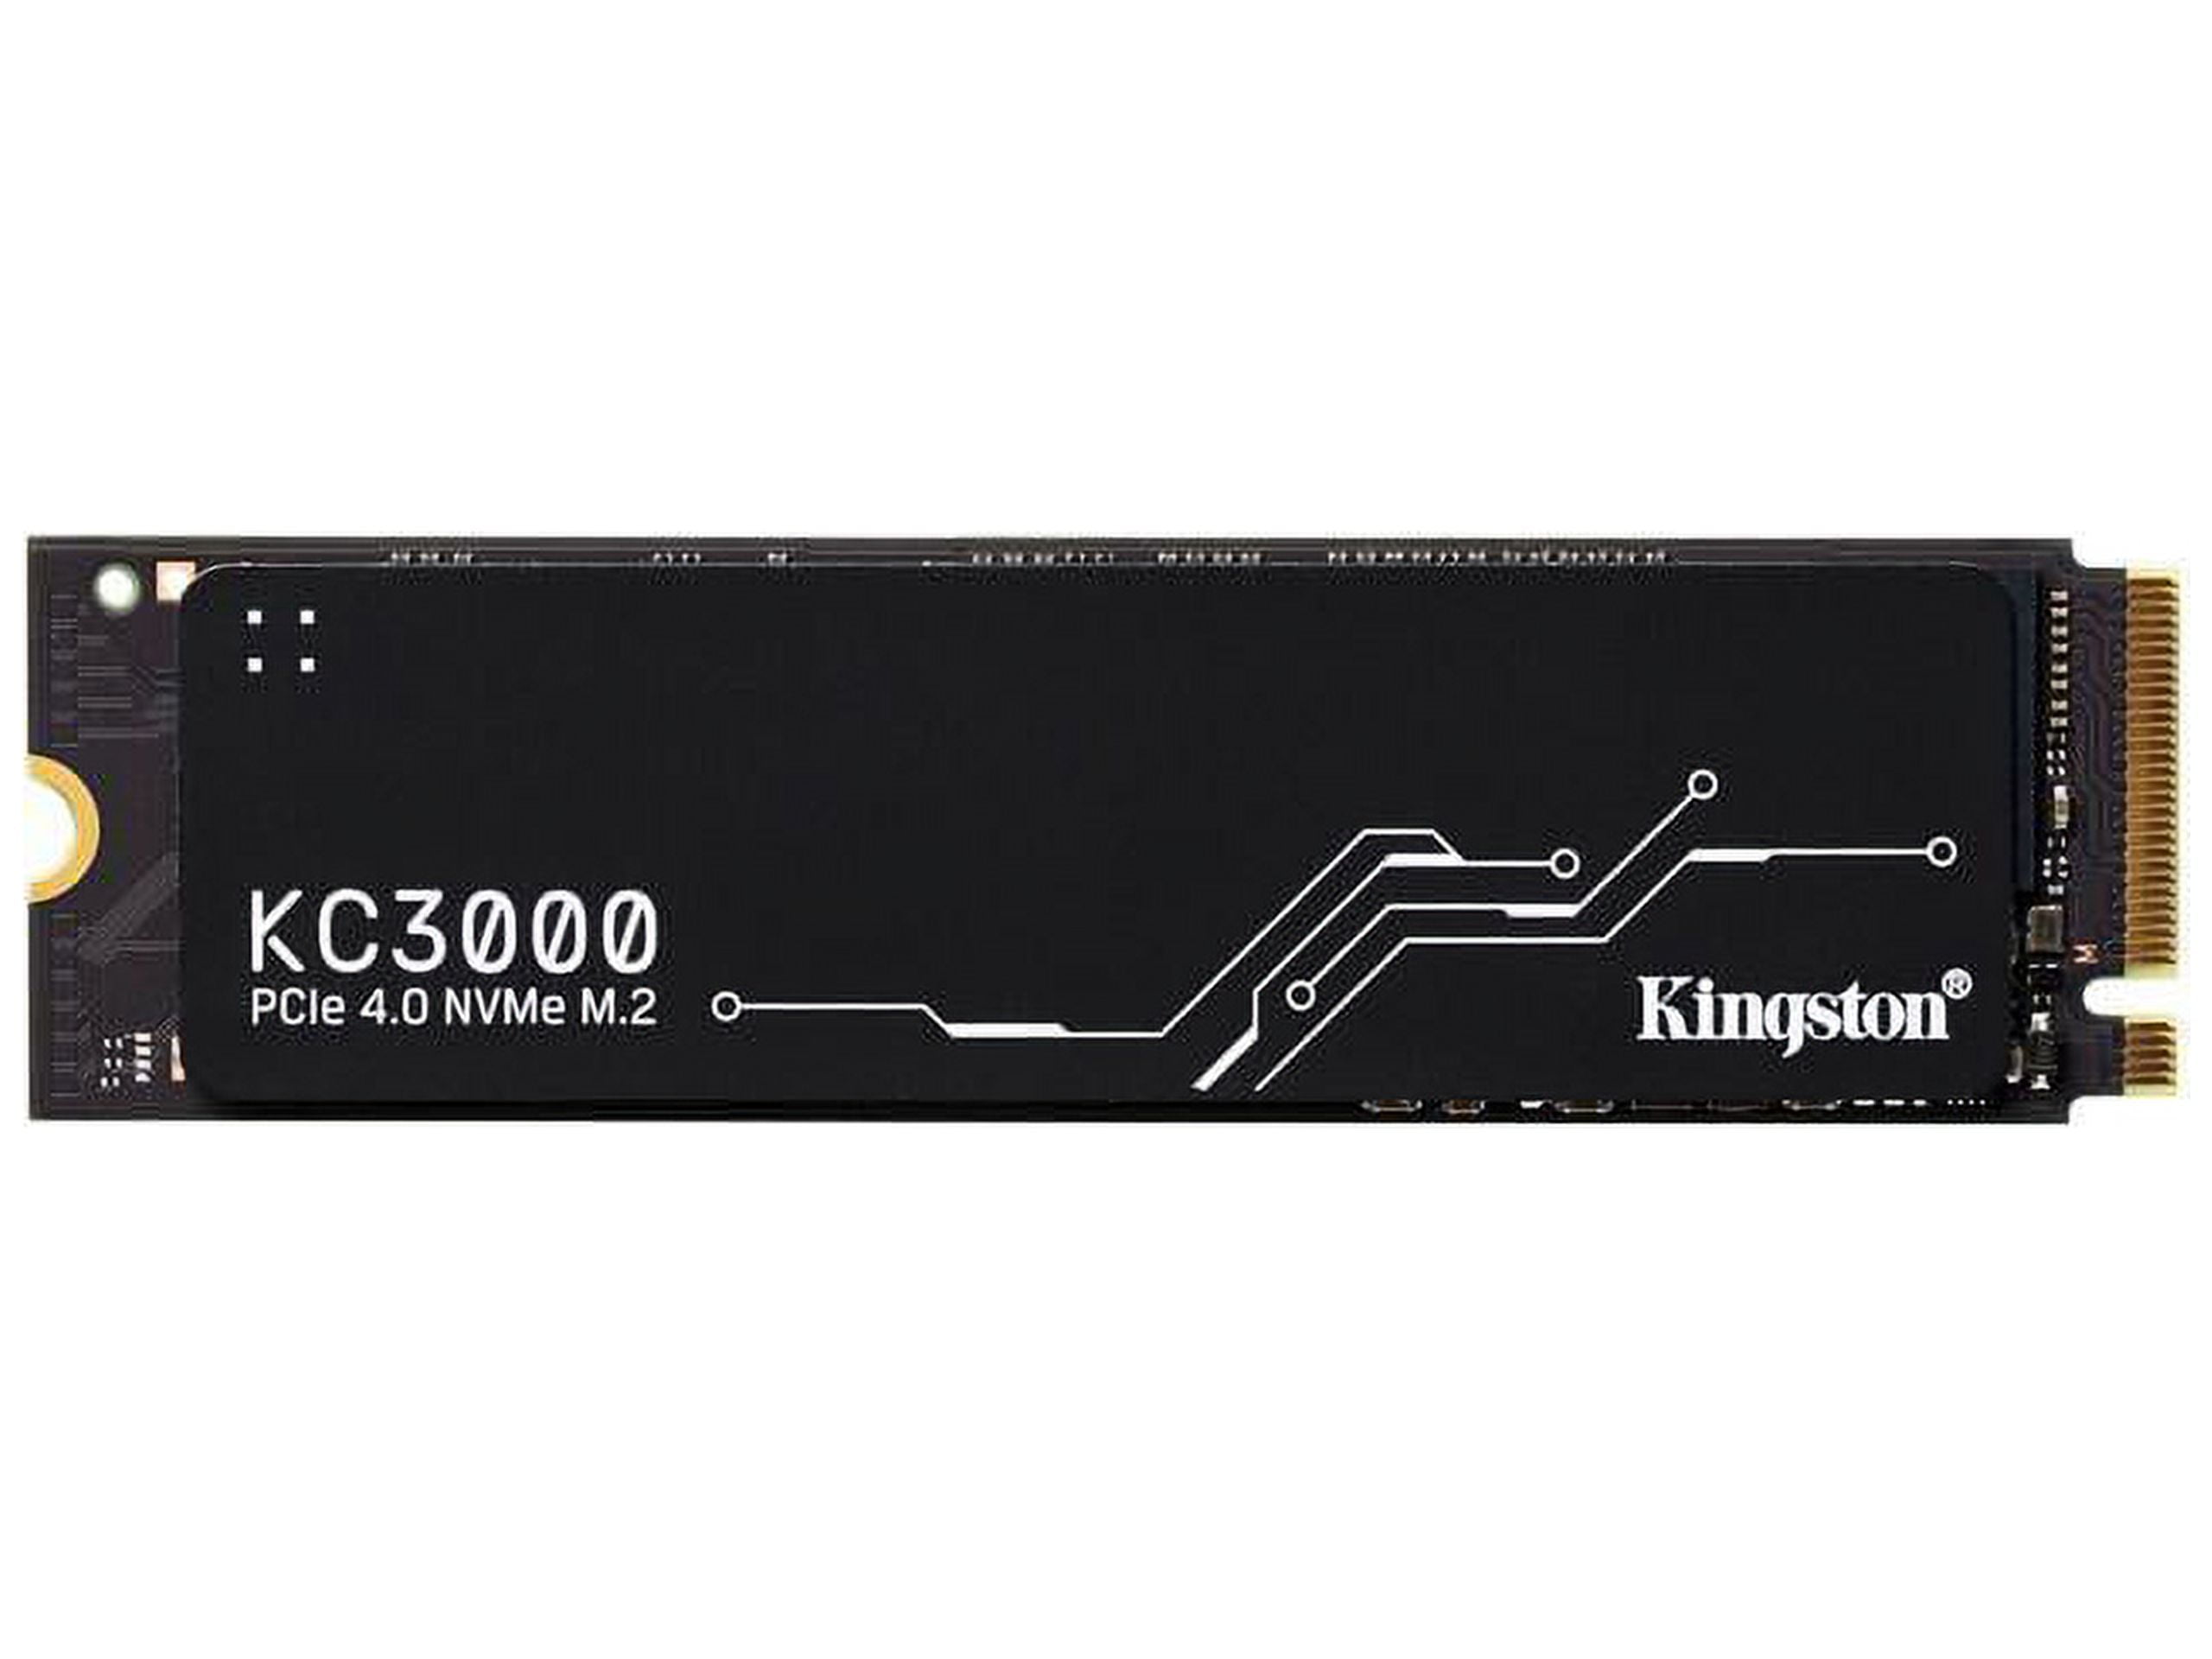 Kingston Q500 SSD Review: Incredible Speeds and Rock-Solid Reliability